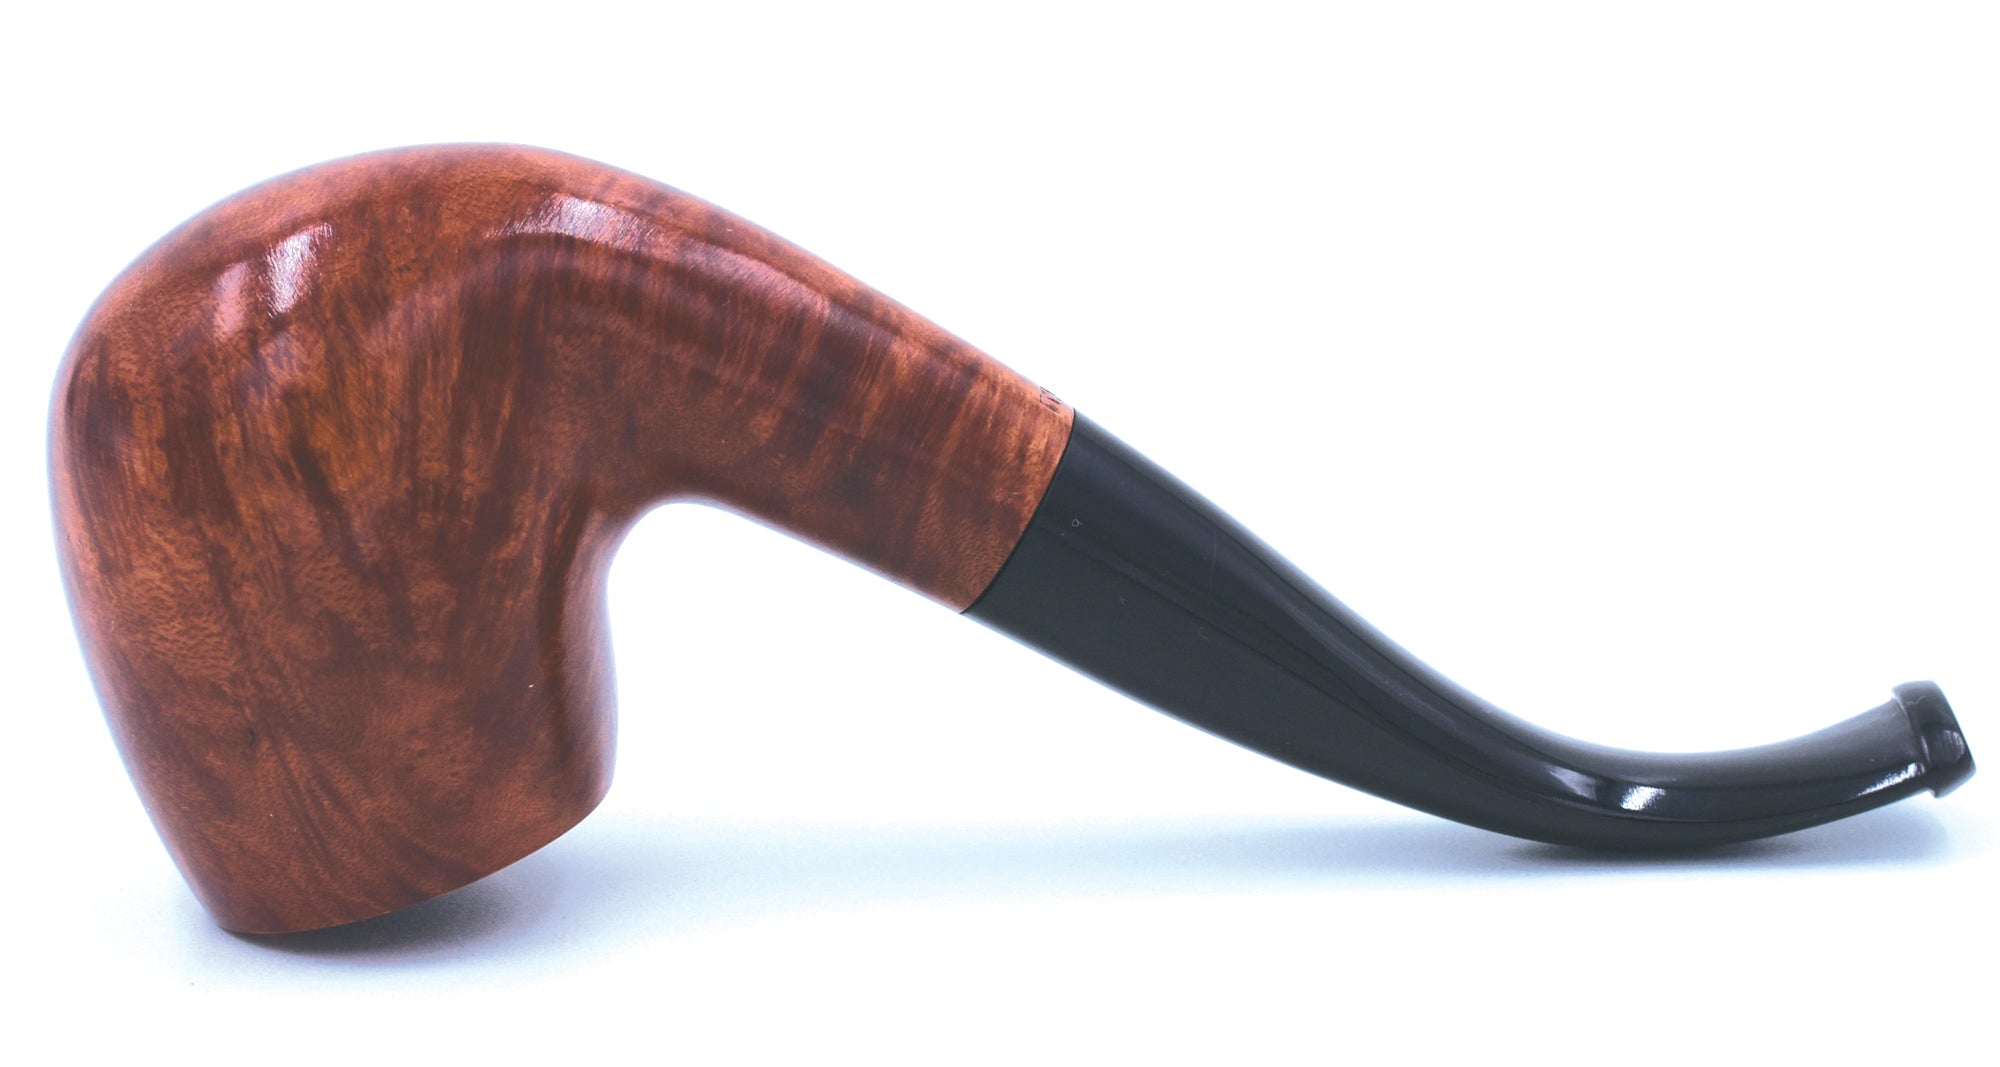 LEGENDEX® PAGANINI* 9 MM Filtered Briar Smoking Pipe Made In Italy 01-08-319